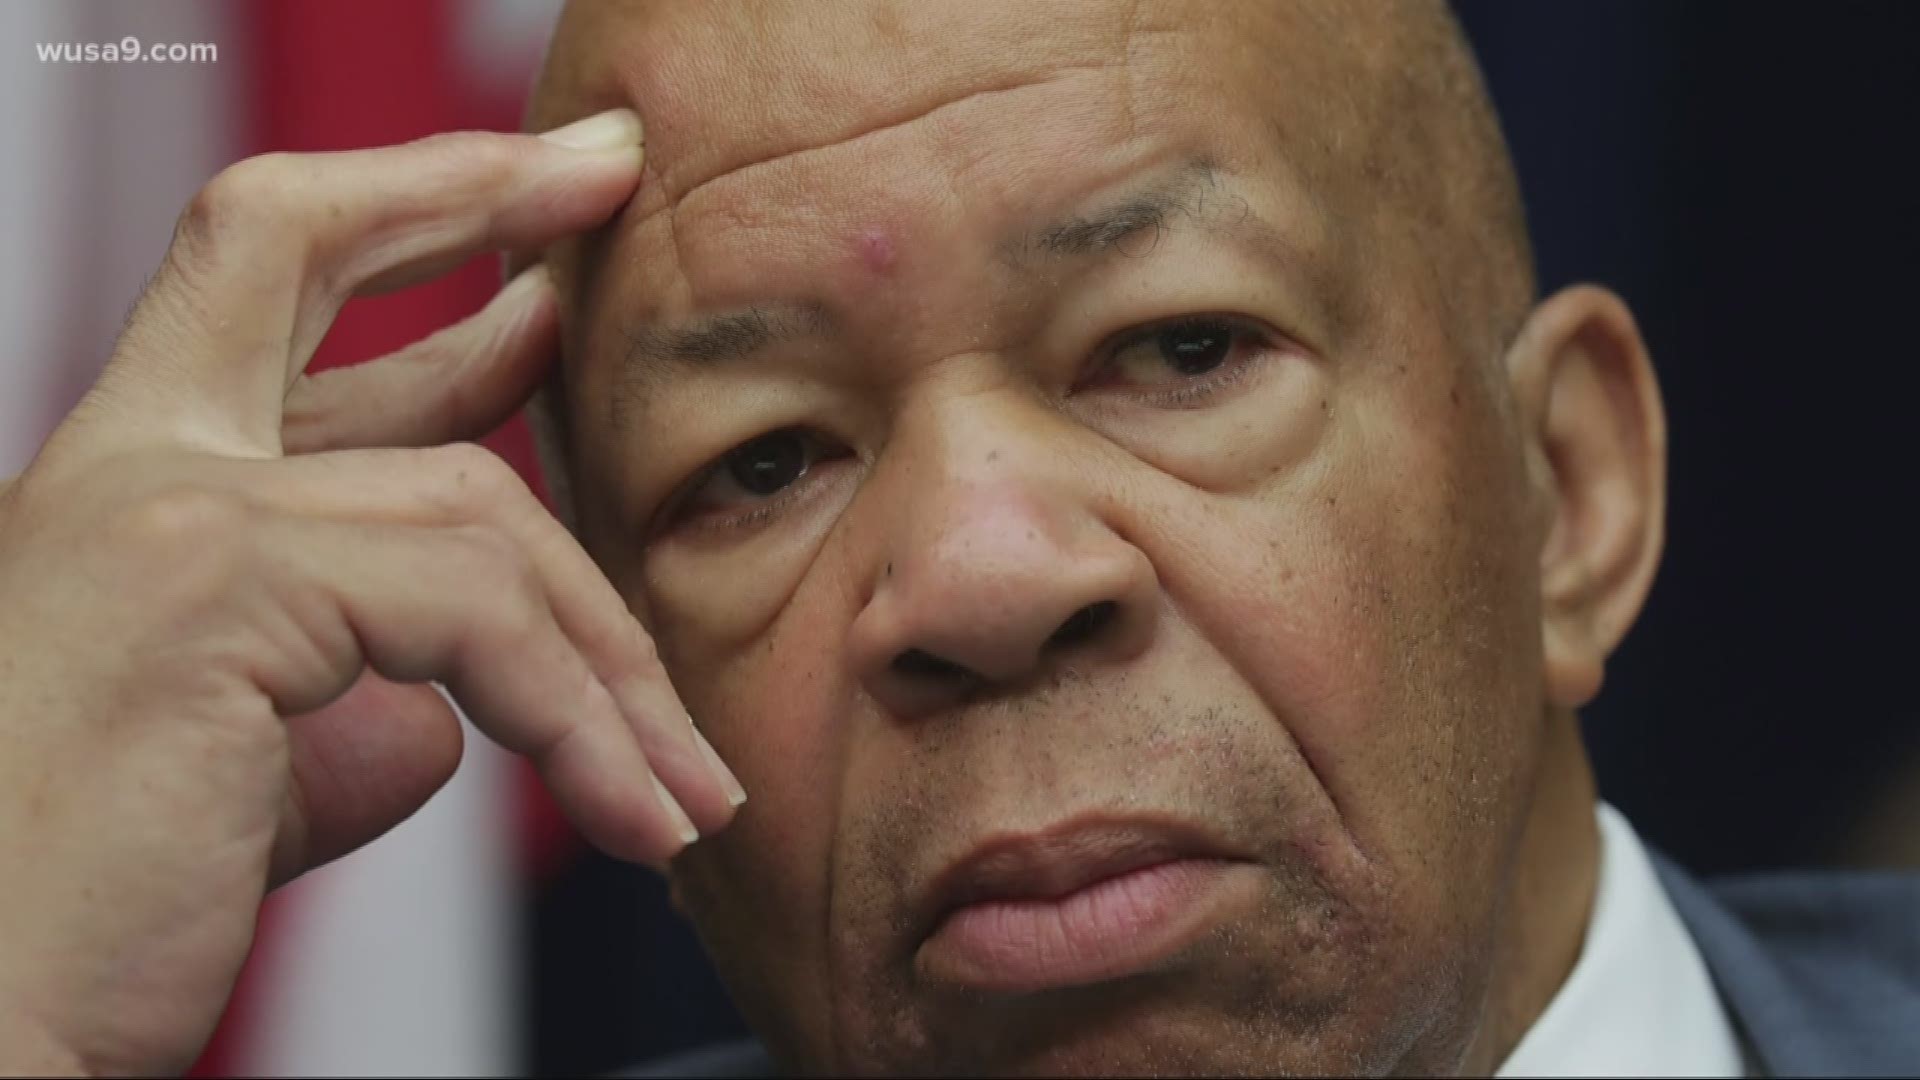 Congressman Cummings passed away at Johns Hopkins hospital due to complications concerning longstanding health challenges.